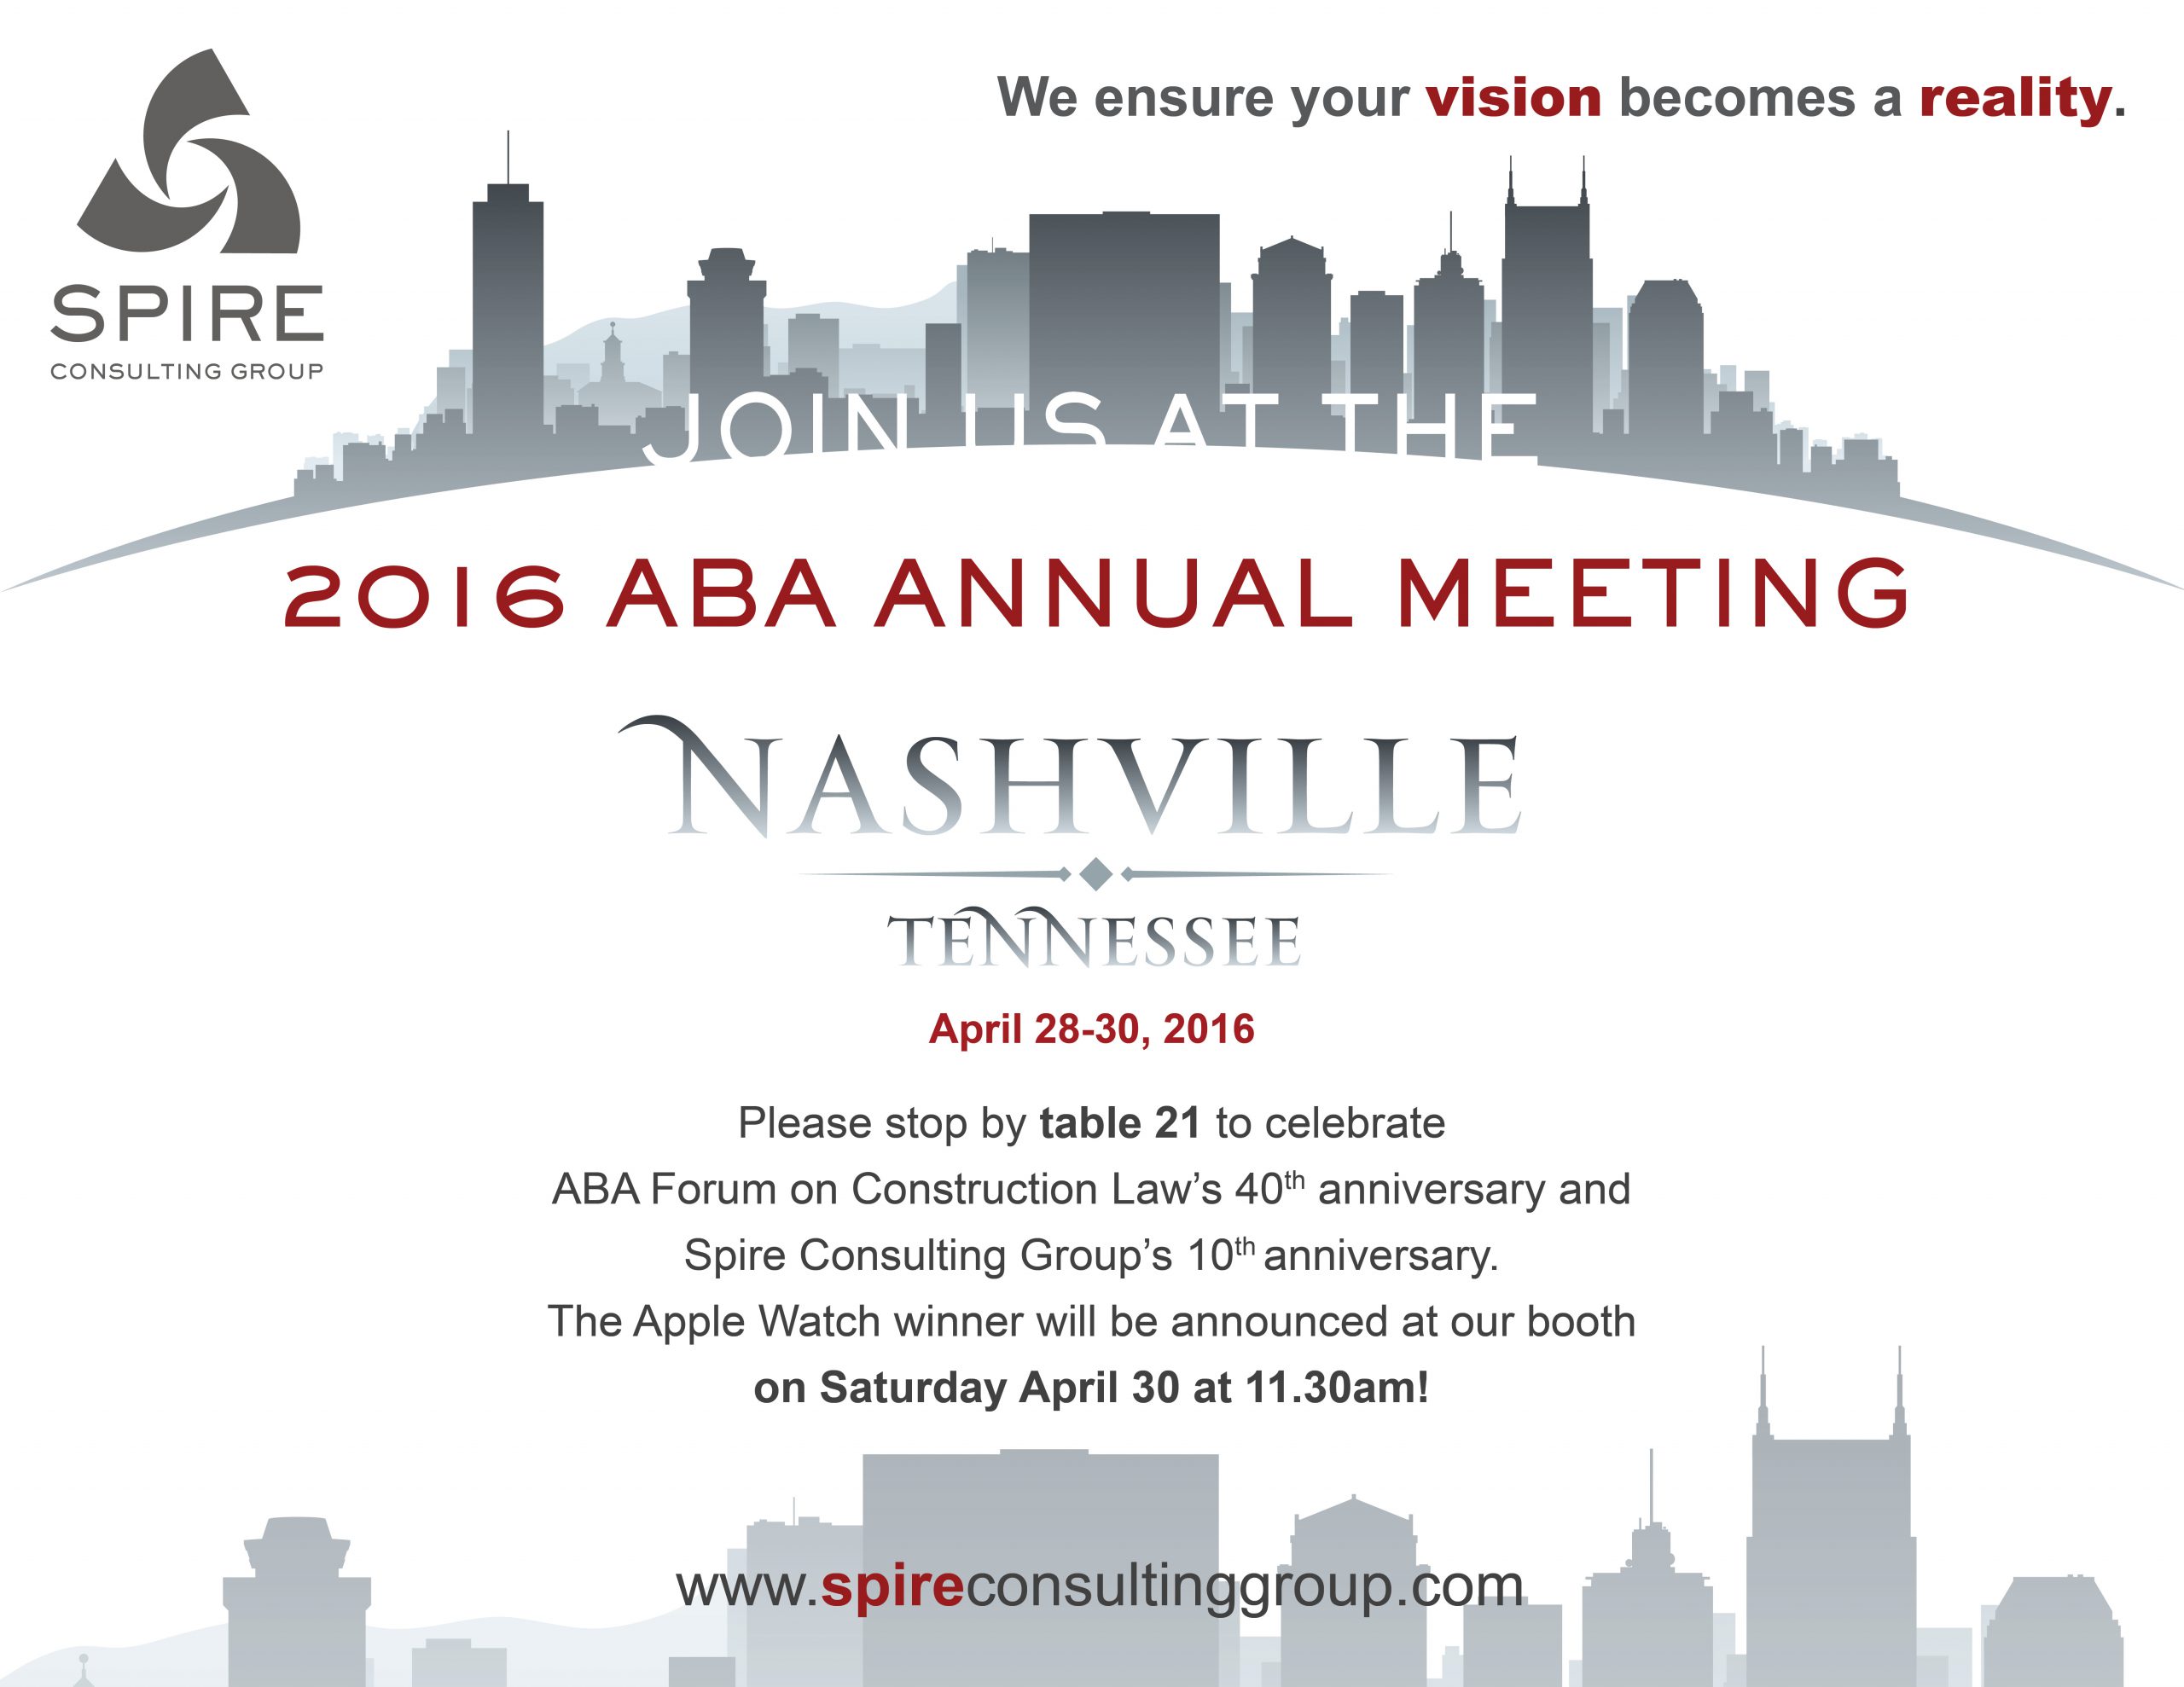 ABA Nashville Spire Consulting Group meeting